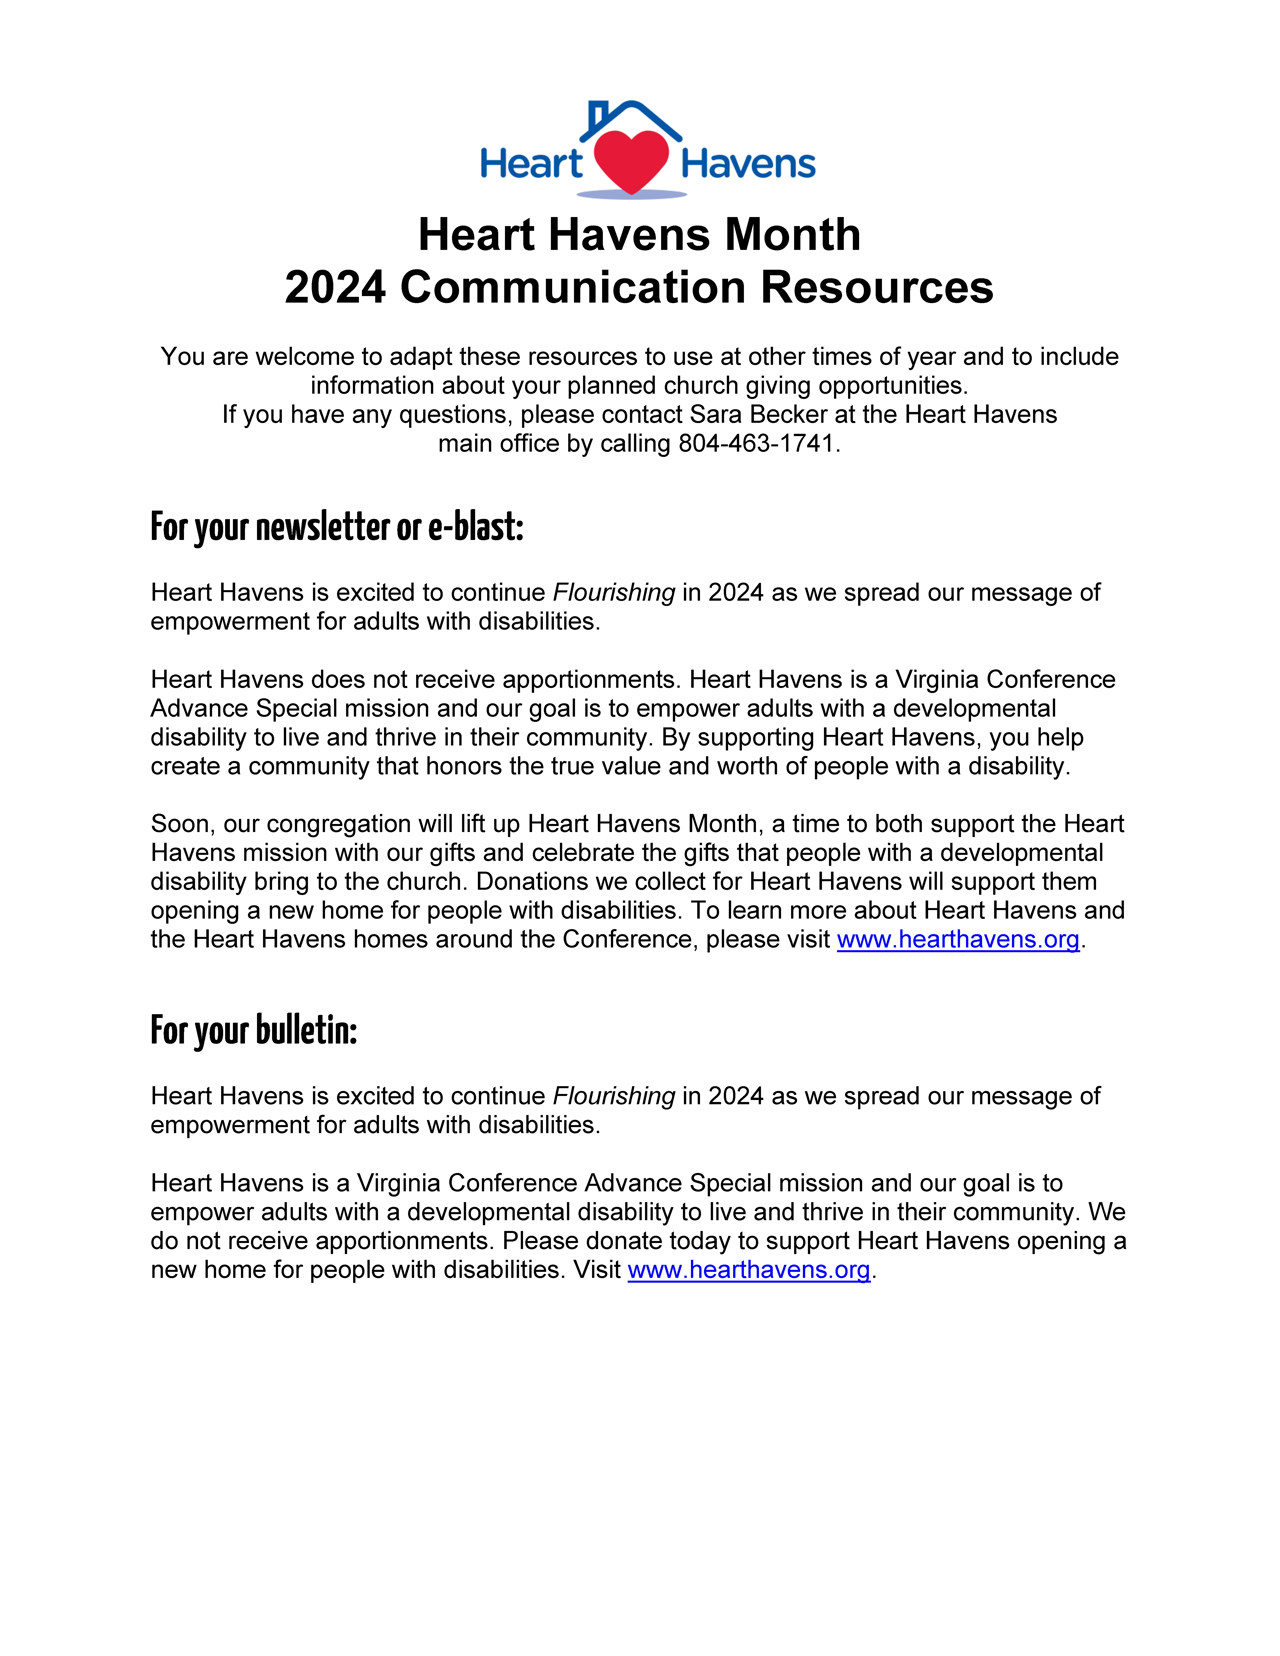 Heart Havens Month 2024 Communication Resources Page 1